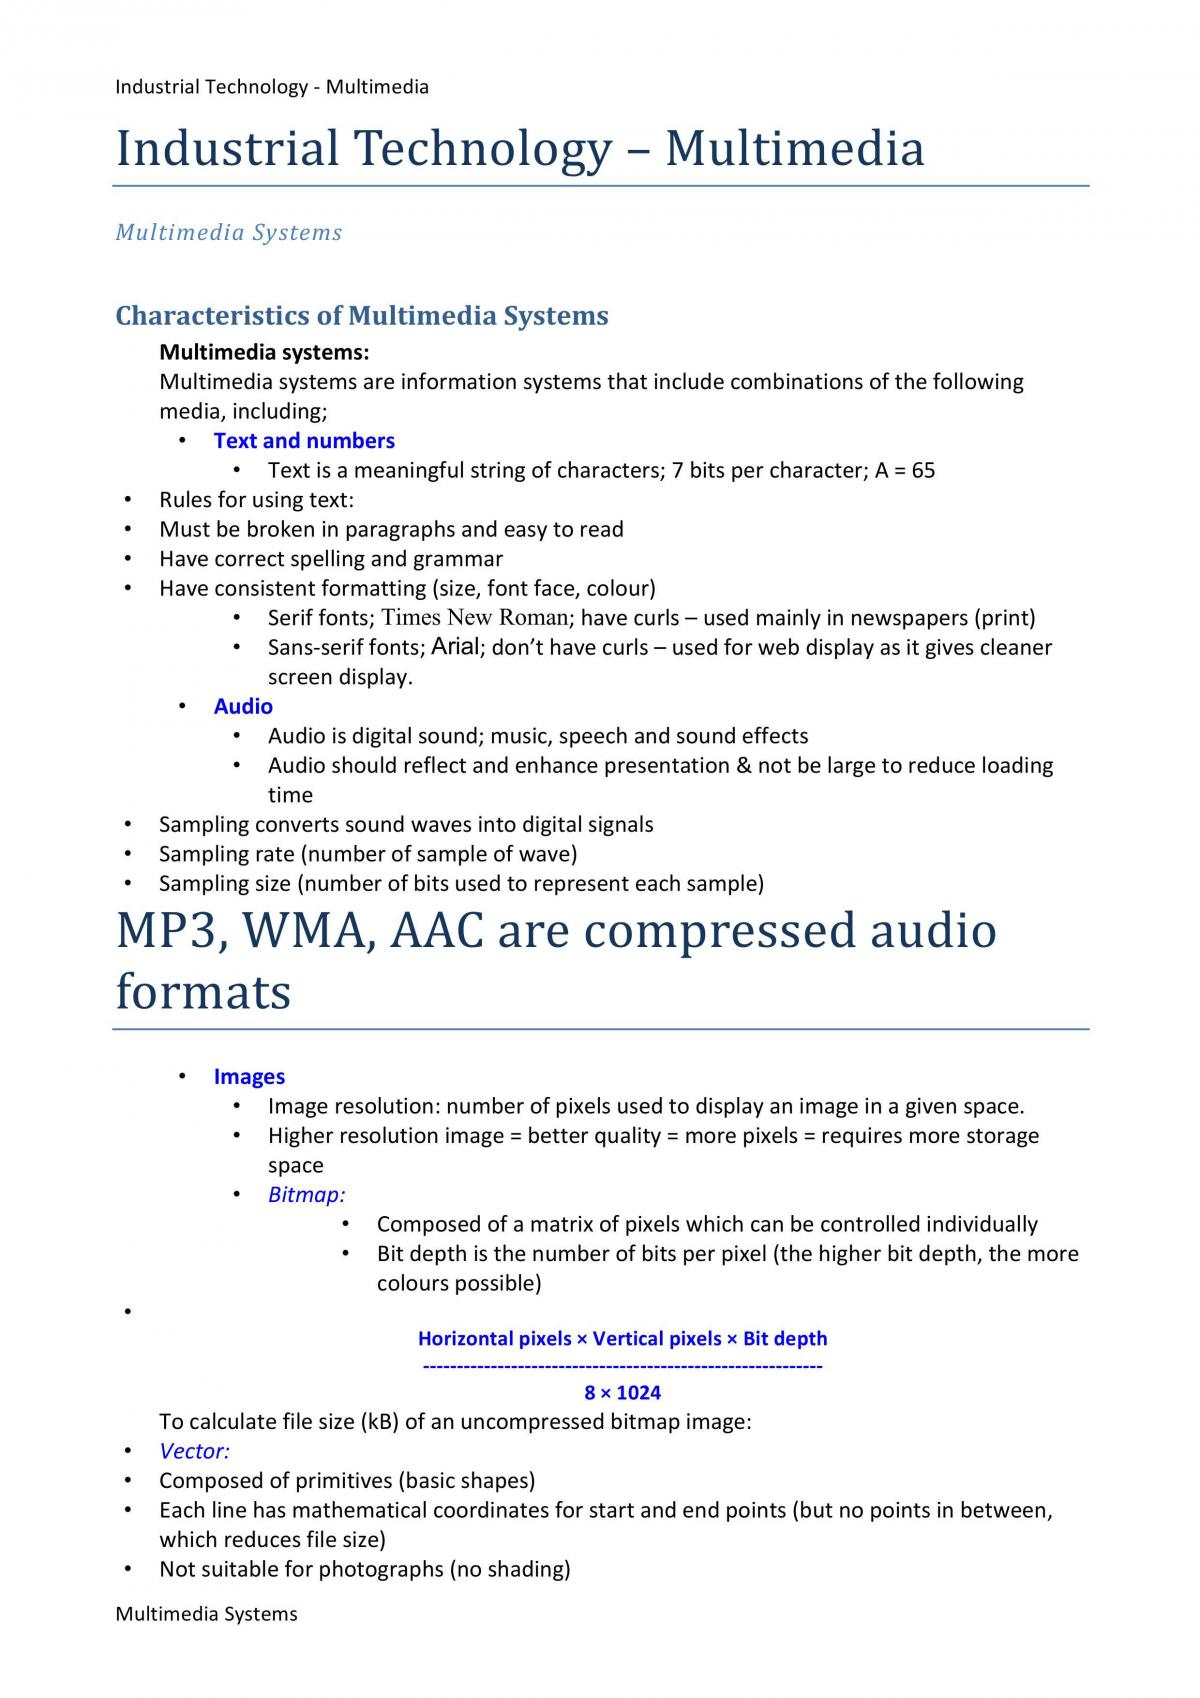 Multimedia Systems Notes - IPT and Multimedia Subject - Page 1